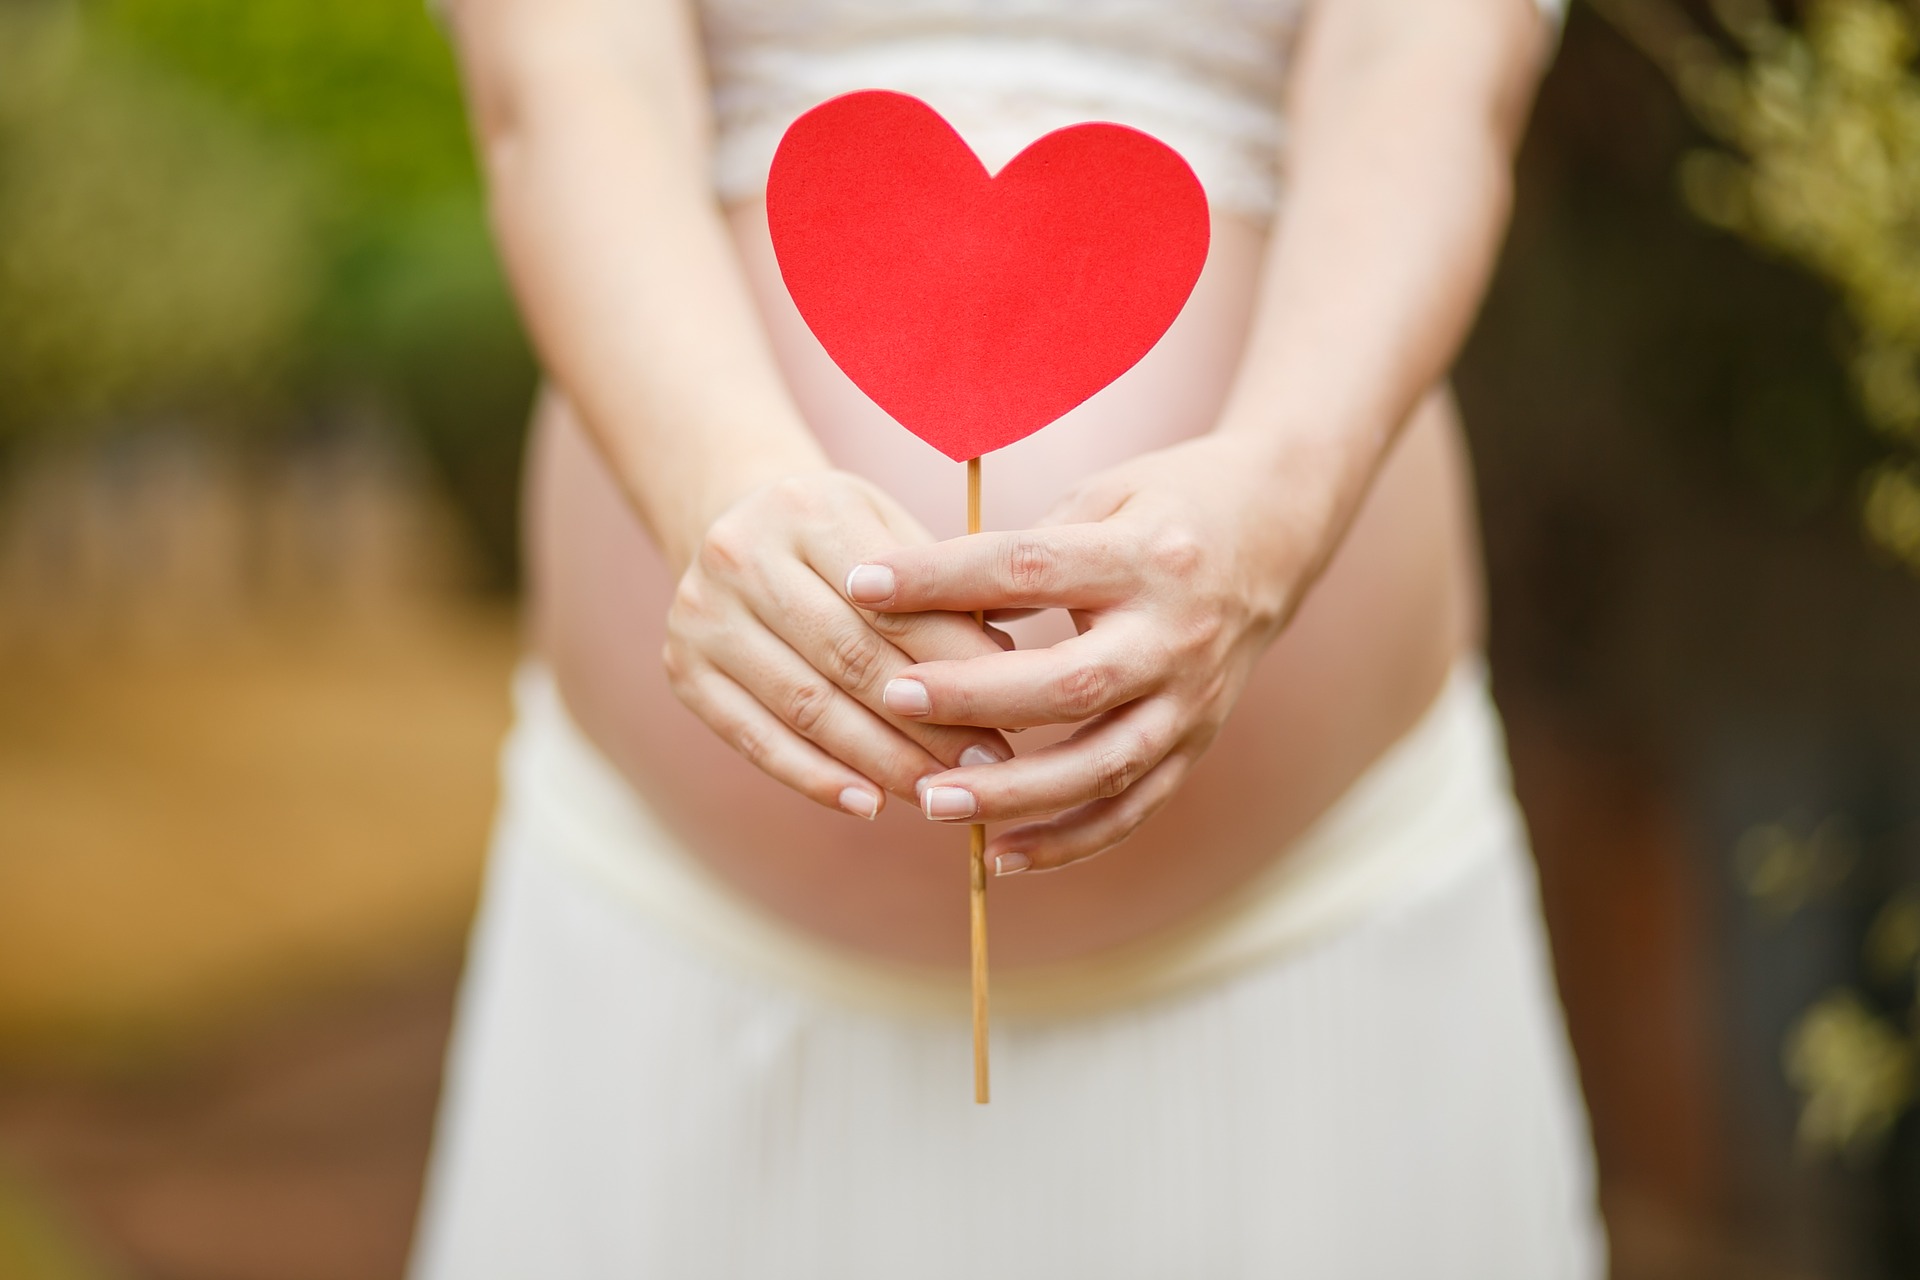 Helping Those in Need: 5 Reasons to Become an Egg Donor